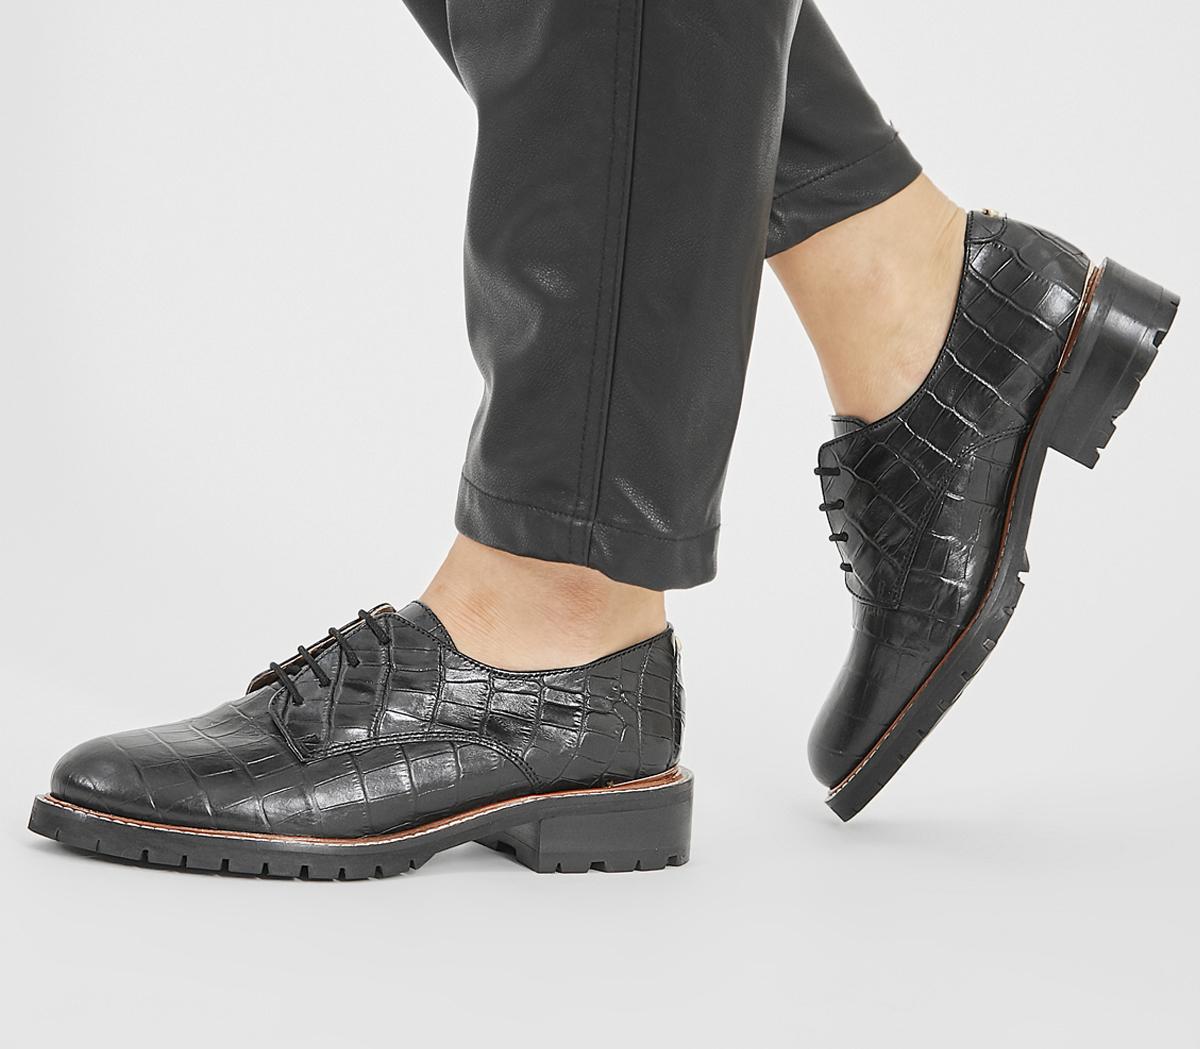 OFFICEKennedy FlatsBlack Croc Leather With Heel Clip